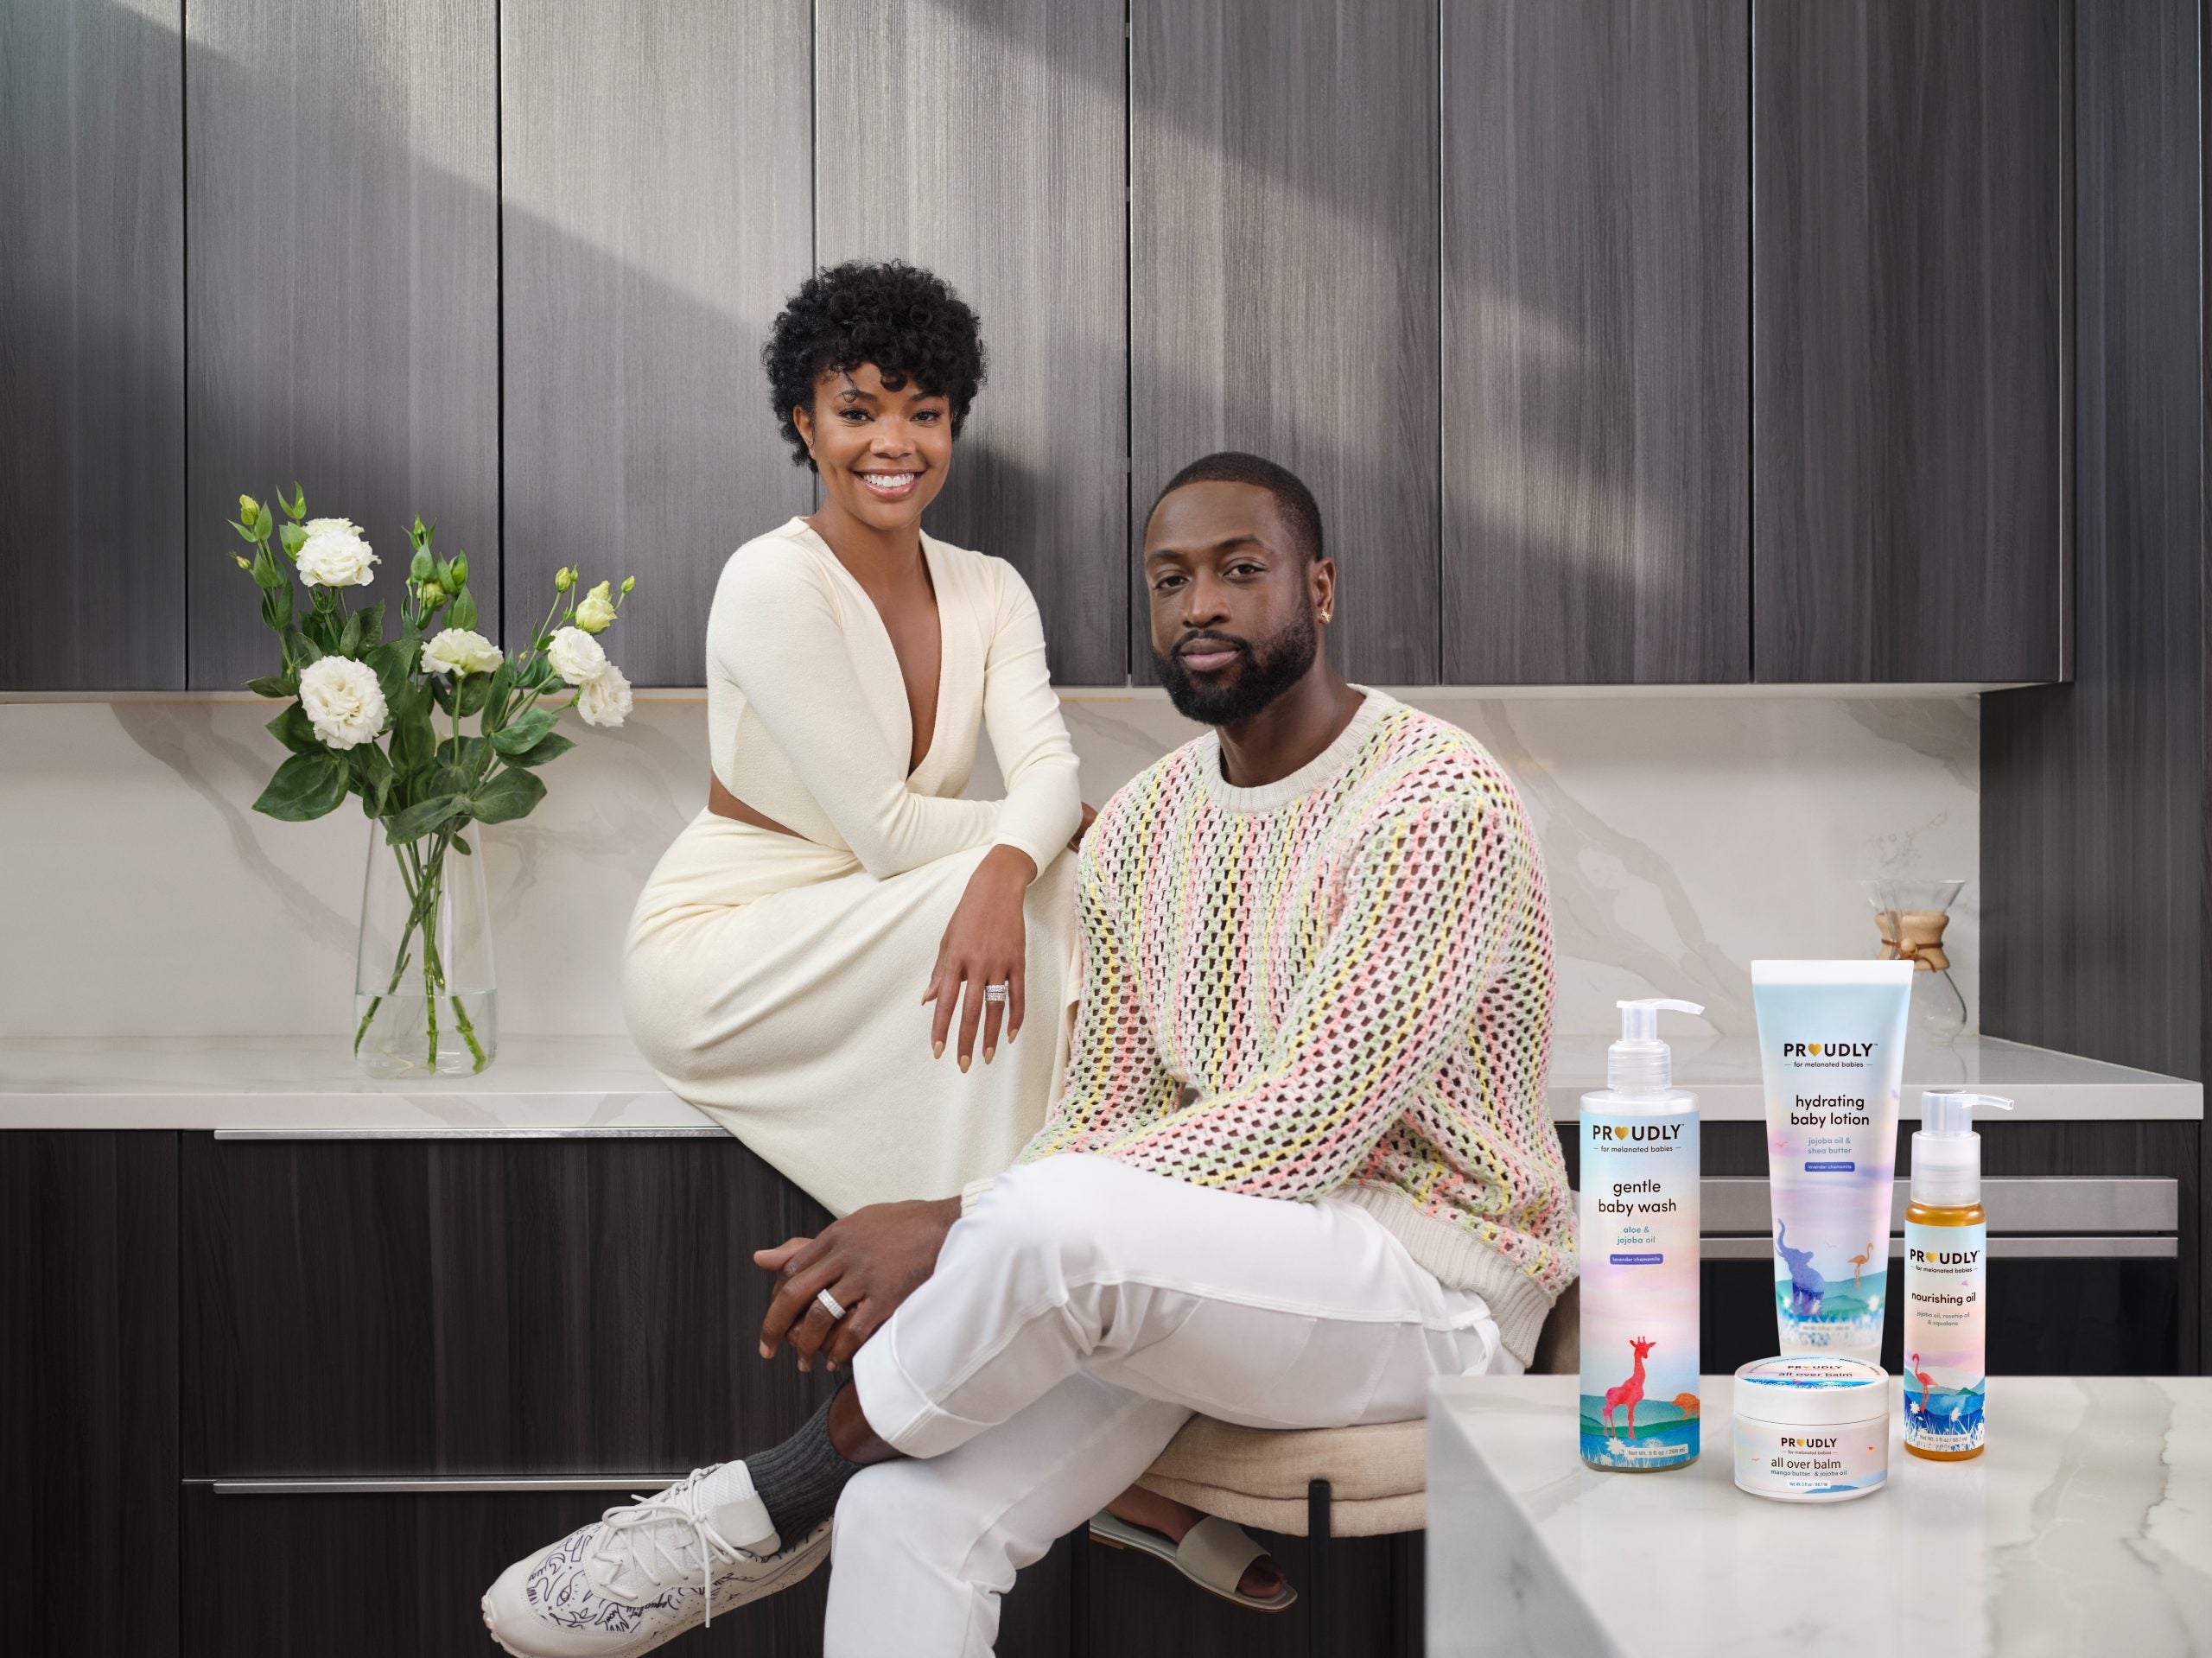 A ‘Gnarly’ Diaper Rash On Kaavia Inspired Proudly, Gabrielle Union And Dwyane Wade’s New Baby Care Line For Melanated Skin